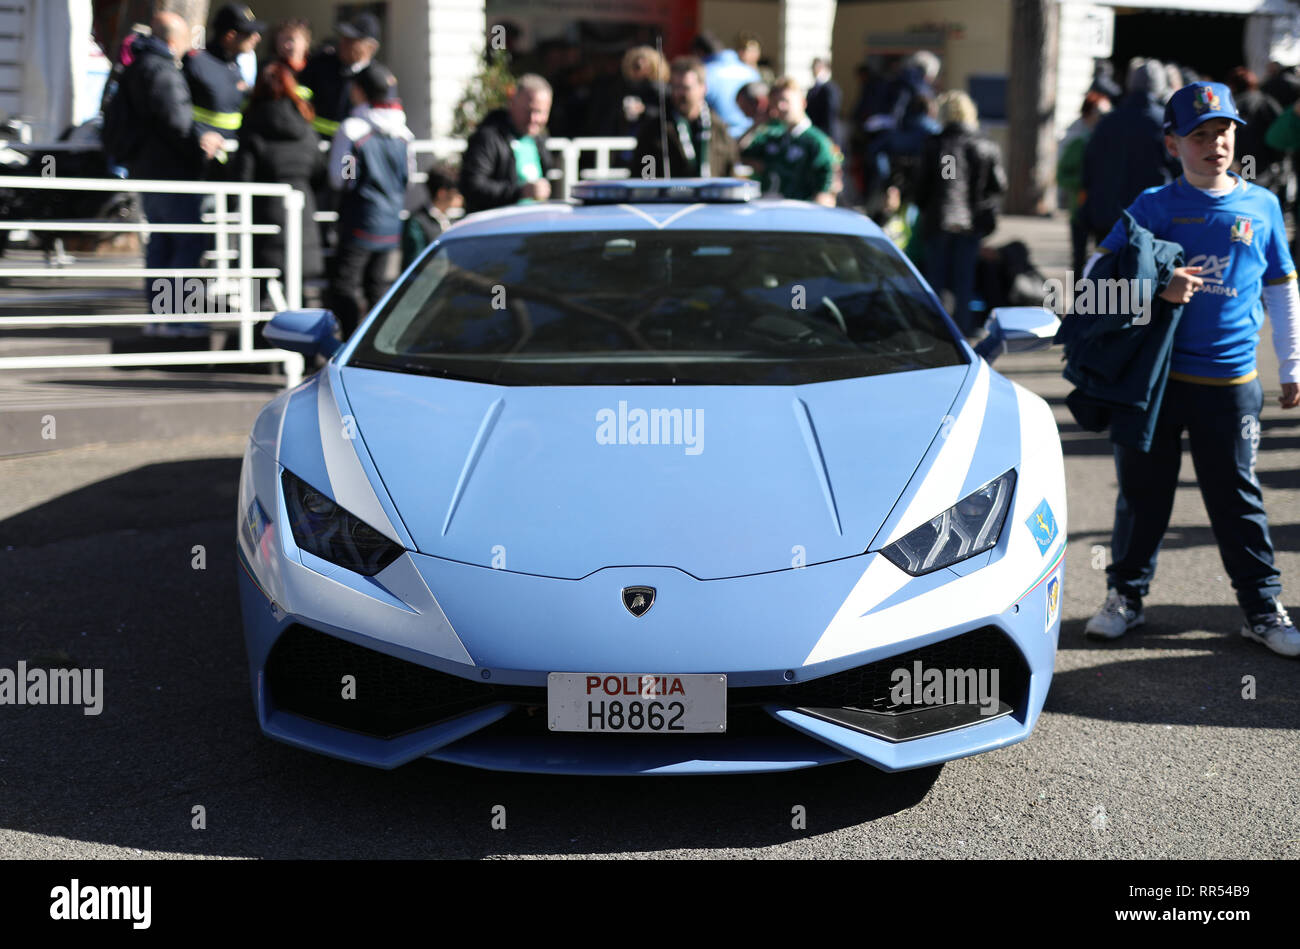 A Lamborghini Huracan used by the Italian Police Force outside the ground before the Guinness Six Nations match at the Stadio Olimpico, Rome, Italy. Stock Photo